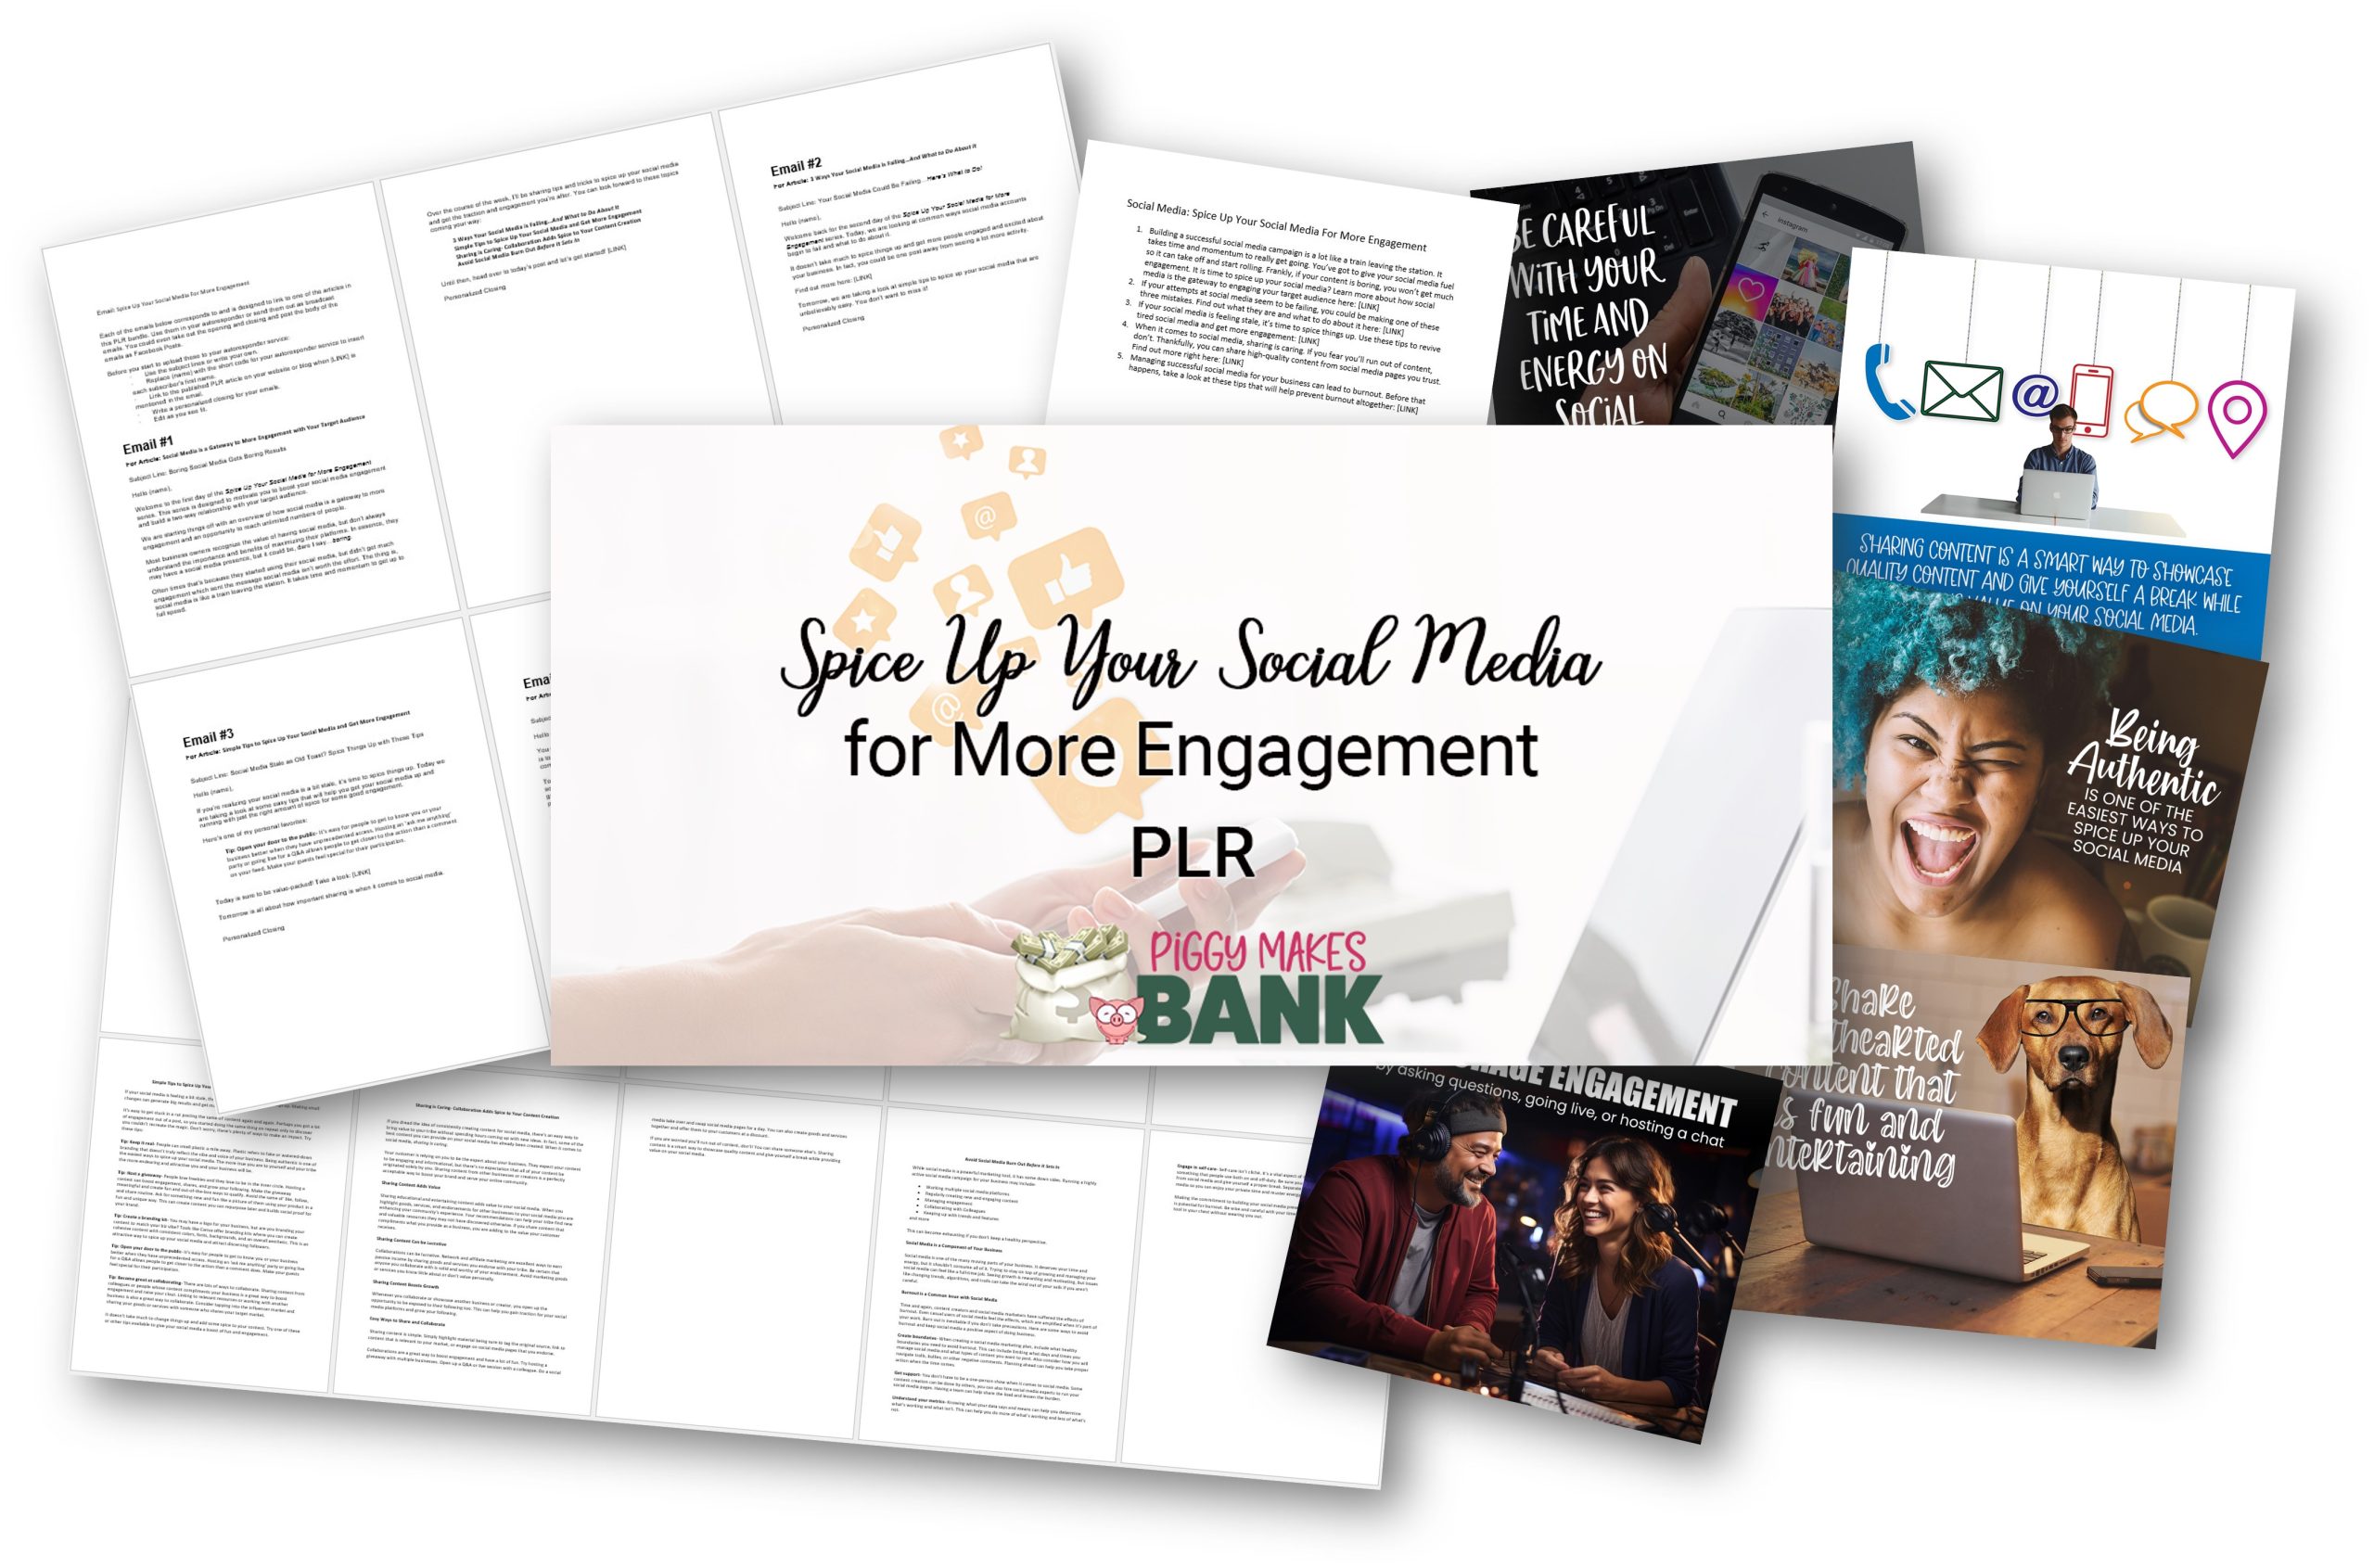 spice up your social media for more engagement plr